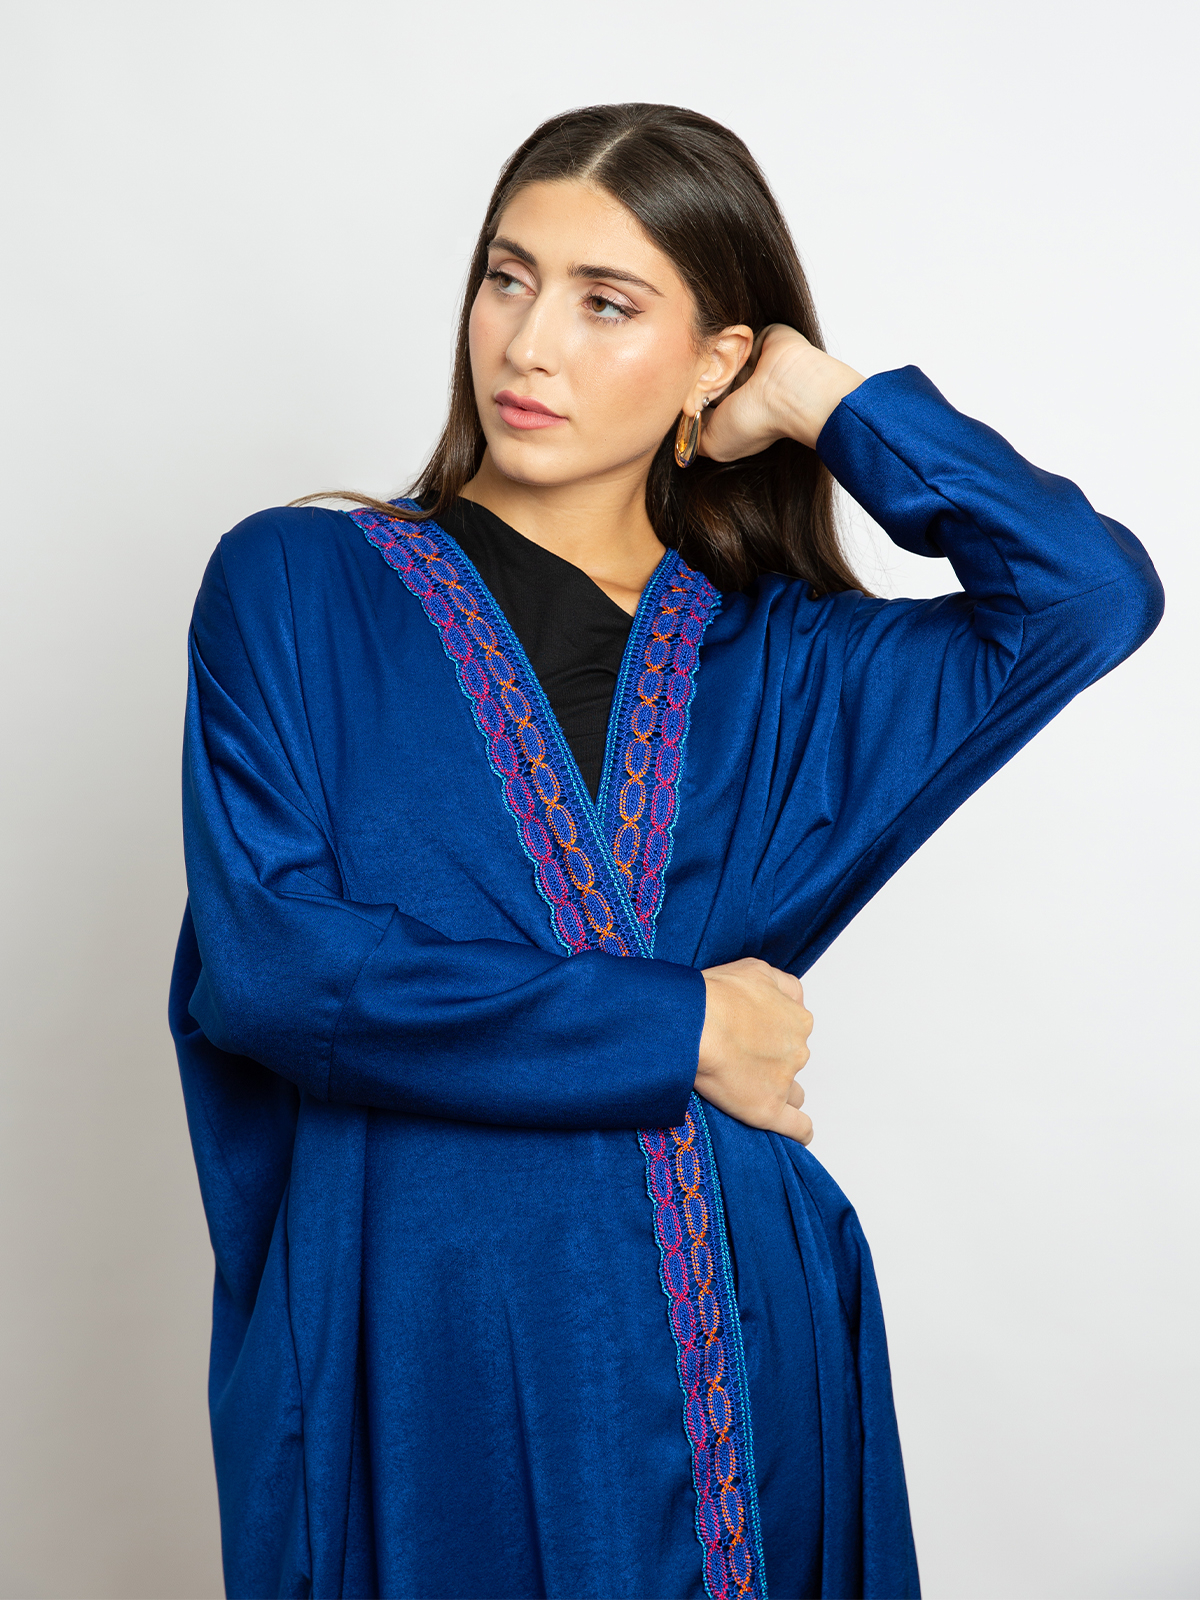 Long open half bisht abaya colorful indigo blue color in soft silky fabric for work and different activities